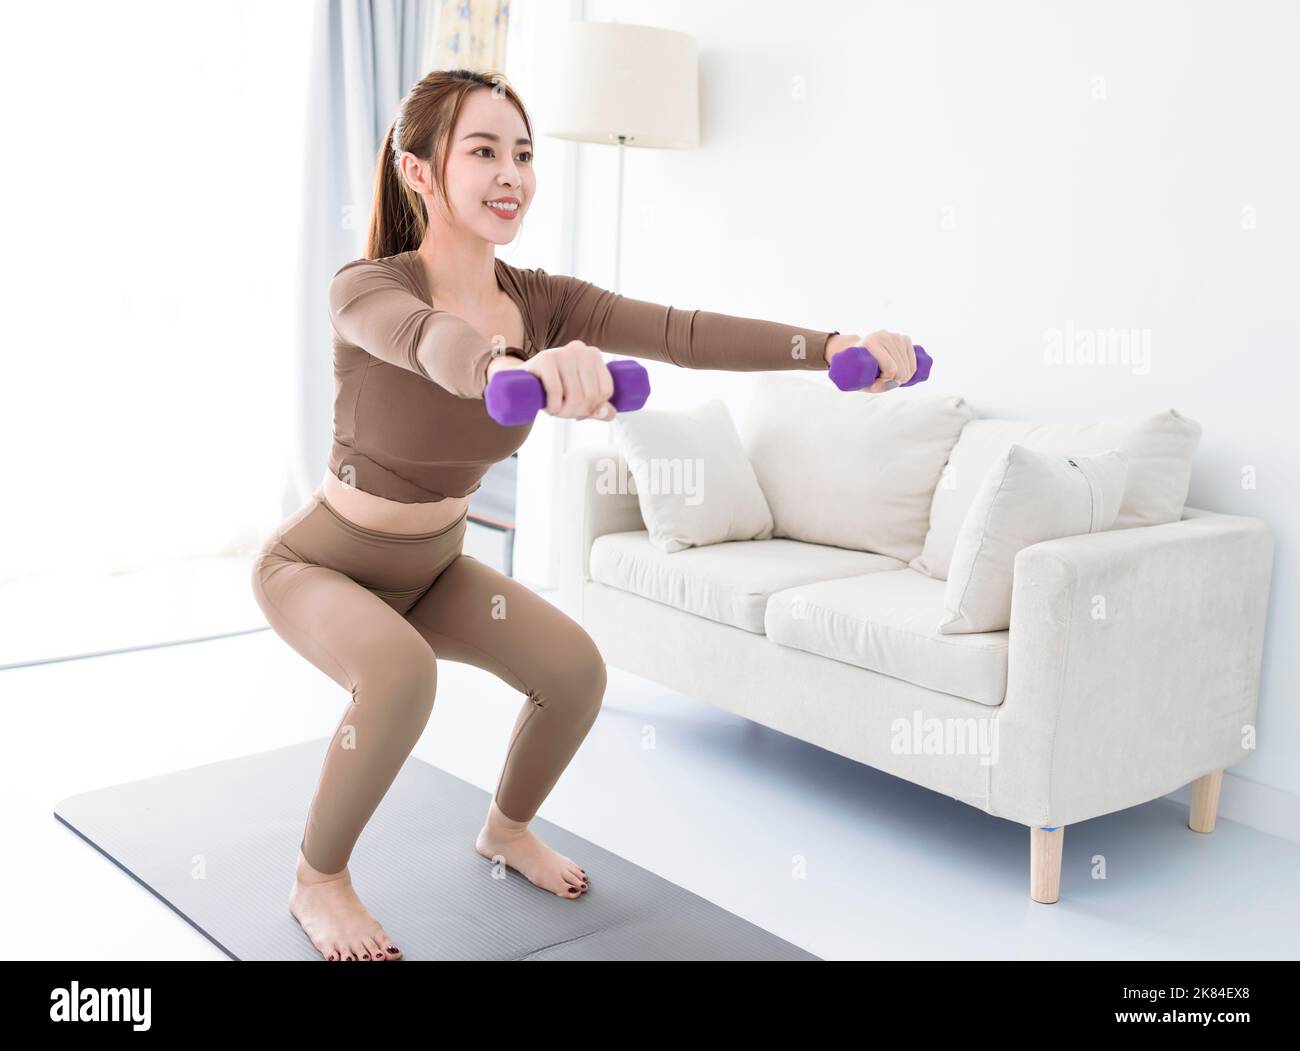 Young woman with dumbbells exercising at home Stock Photo